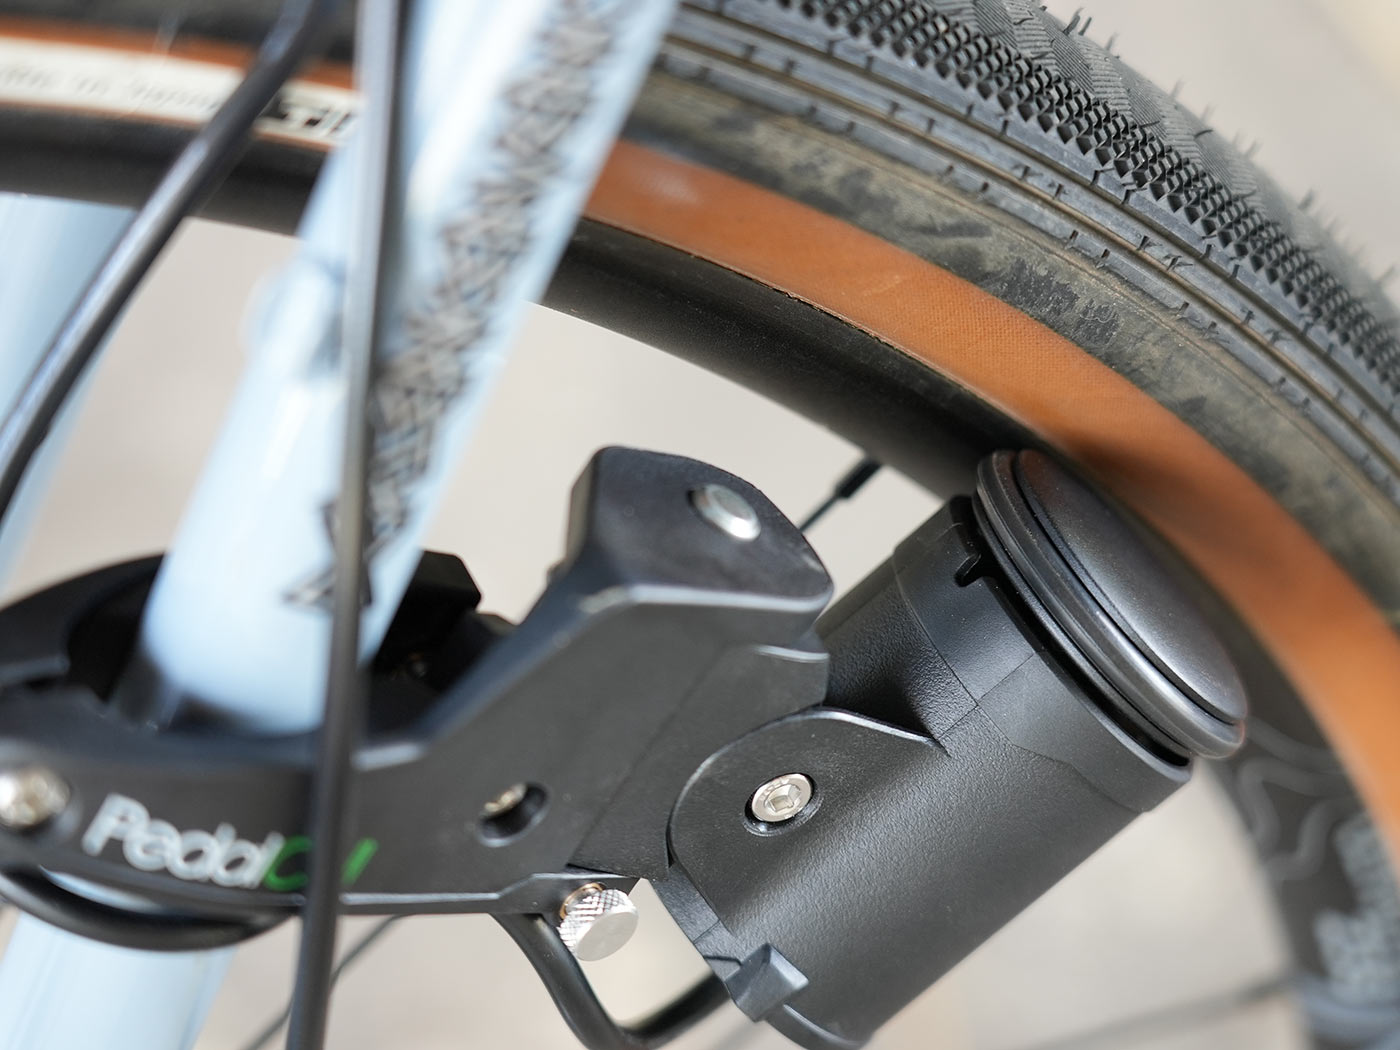 review of pedalcell rim dynamo shown closeup making contact with bicycle wheel rim